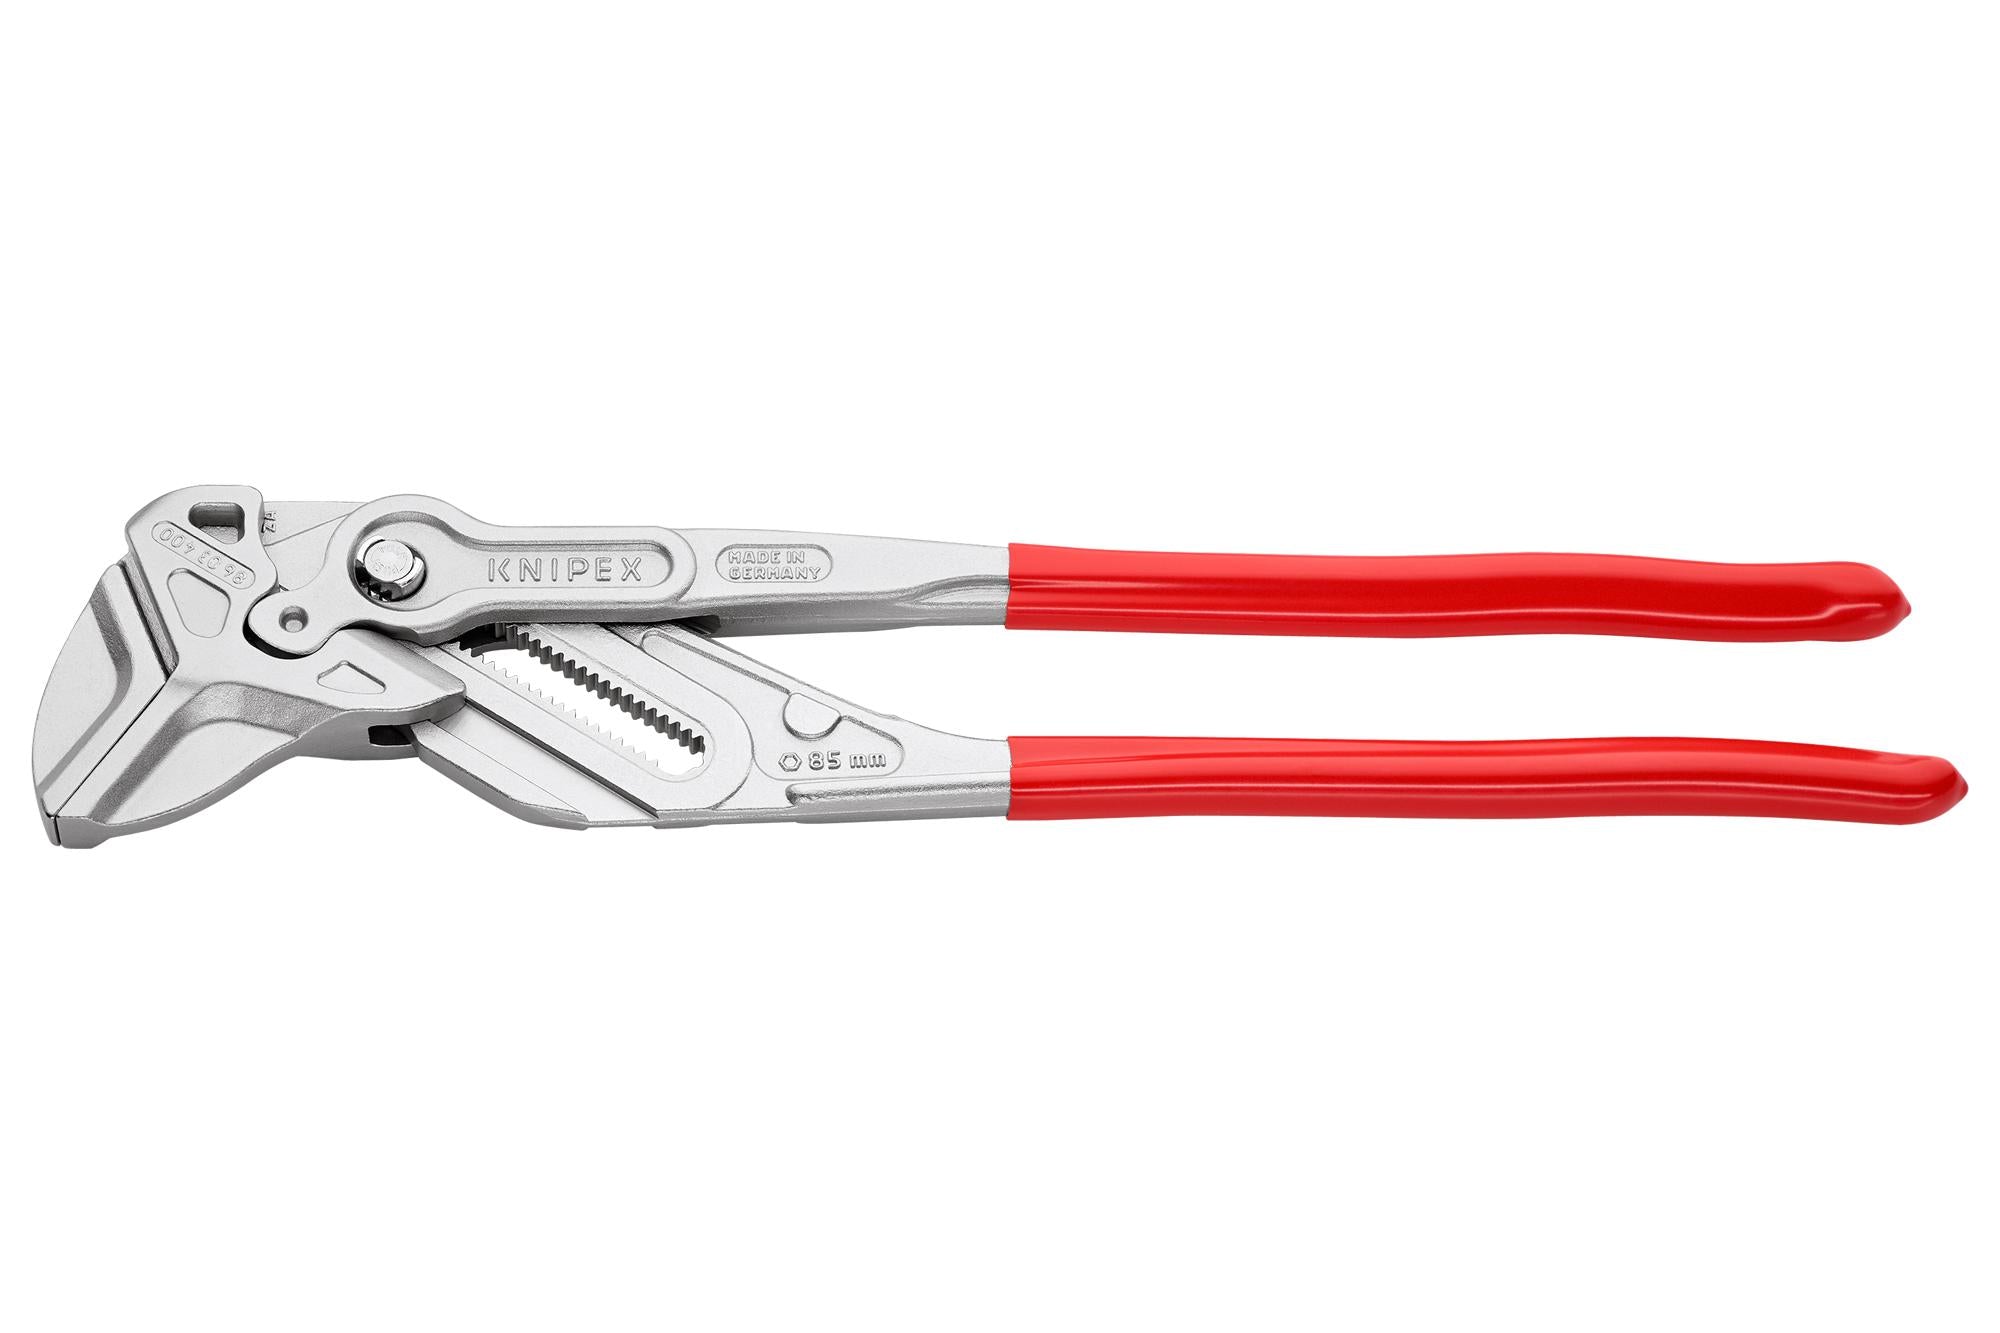 86 03 400 XL PLIER WRENCH, NICKEL PLATED, 400MM KNIPEX